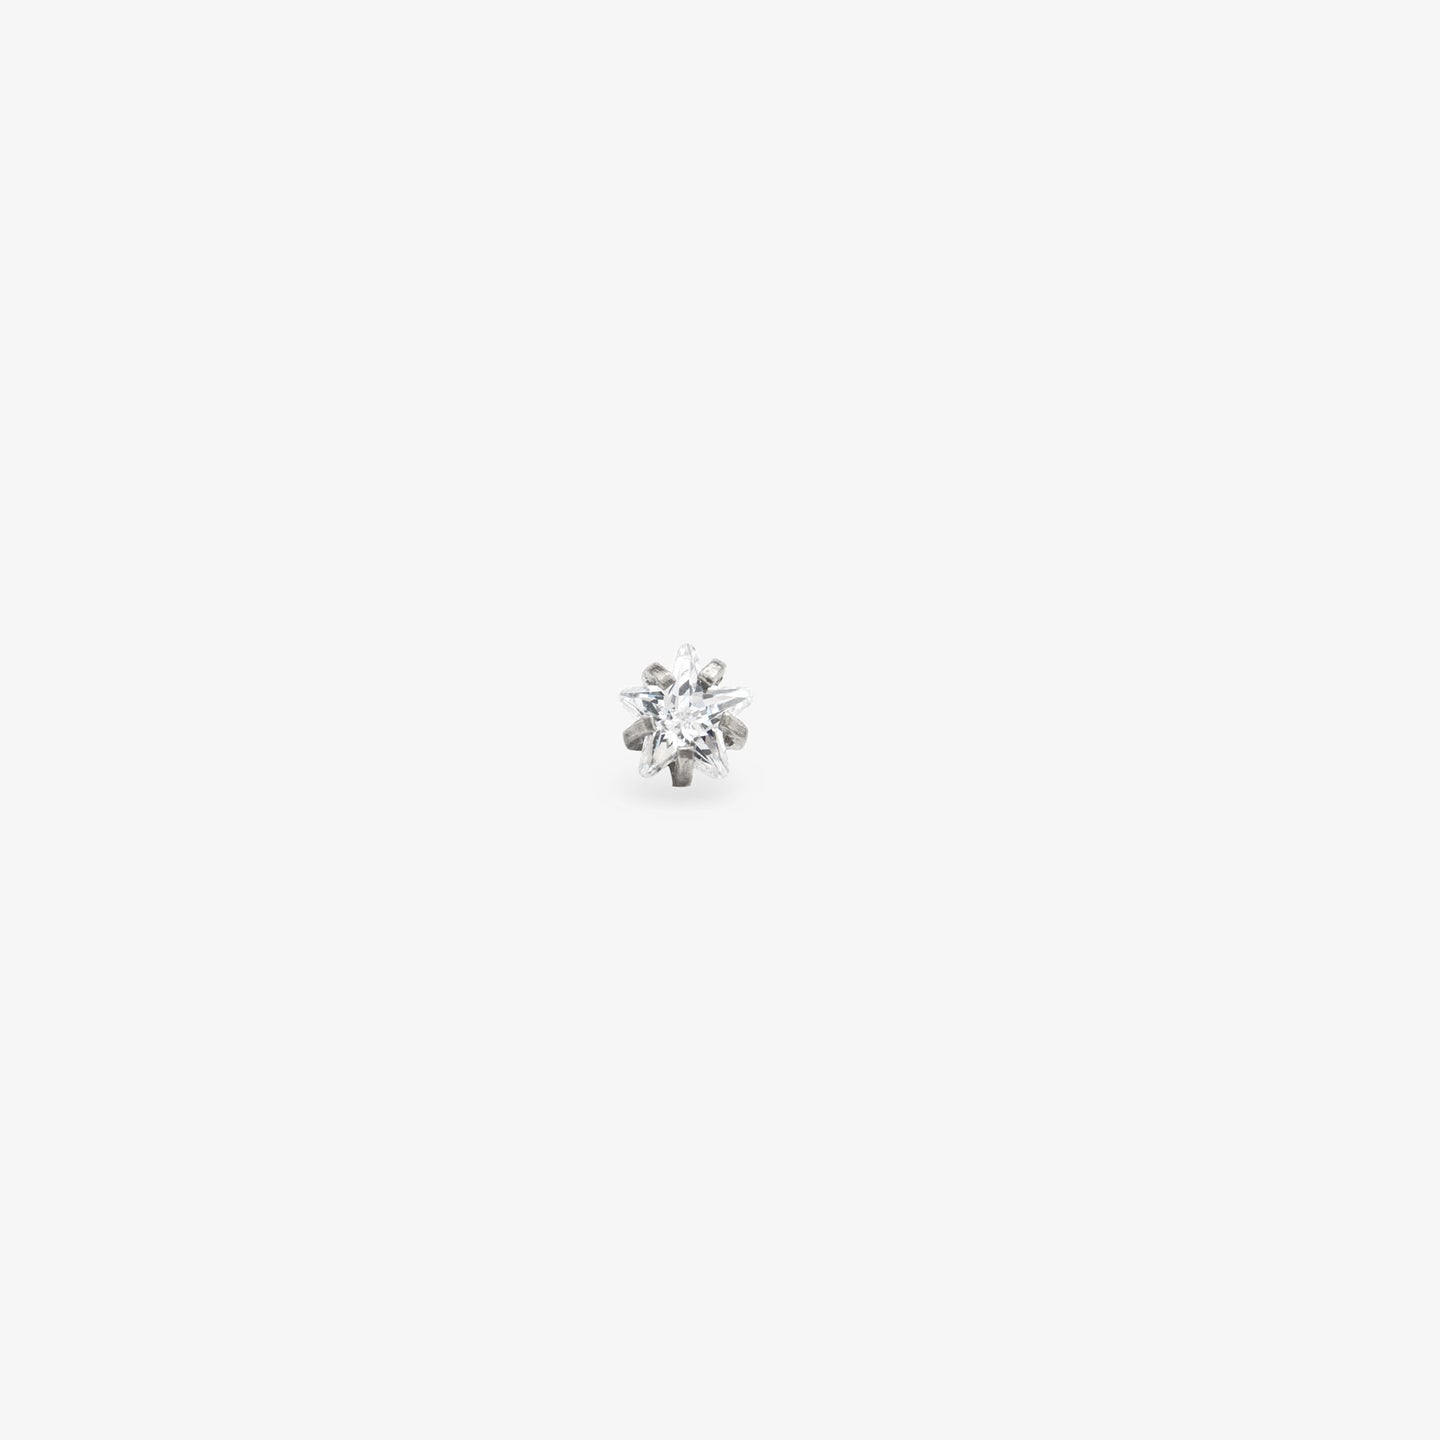 This is a silver stud with a cz crystal star color:null|silver/clear